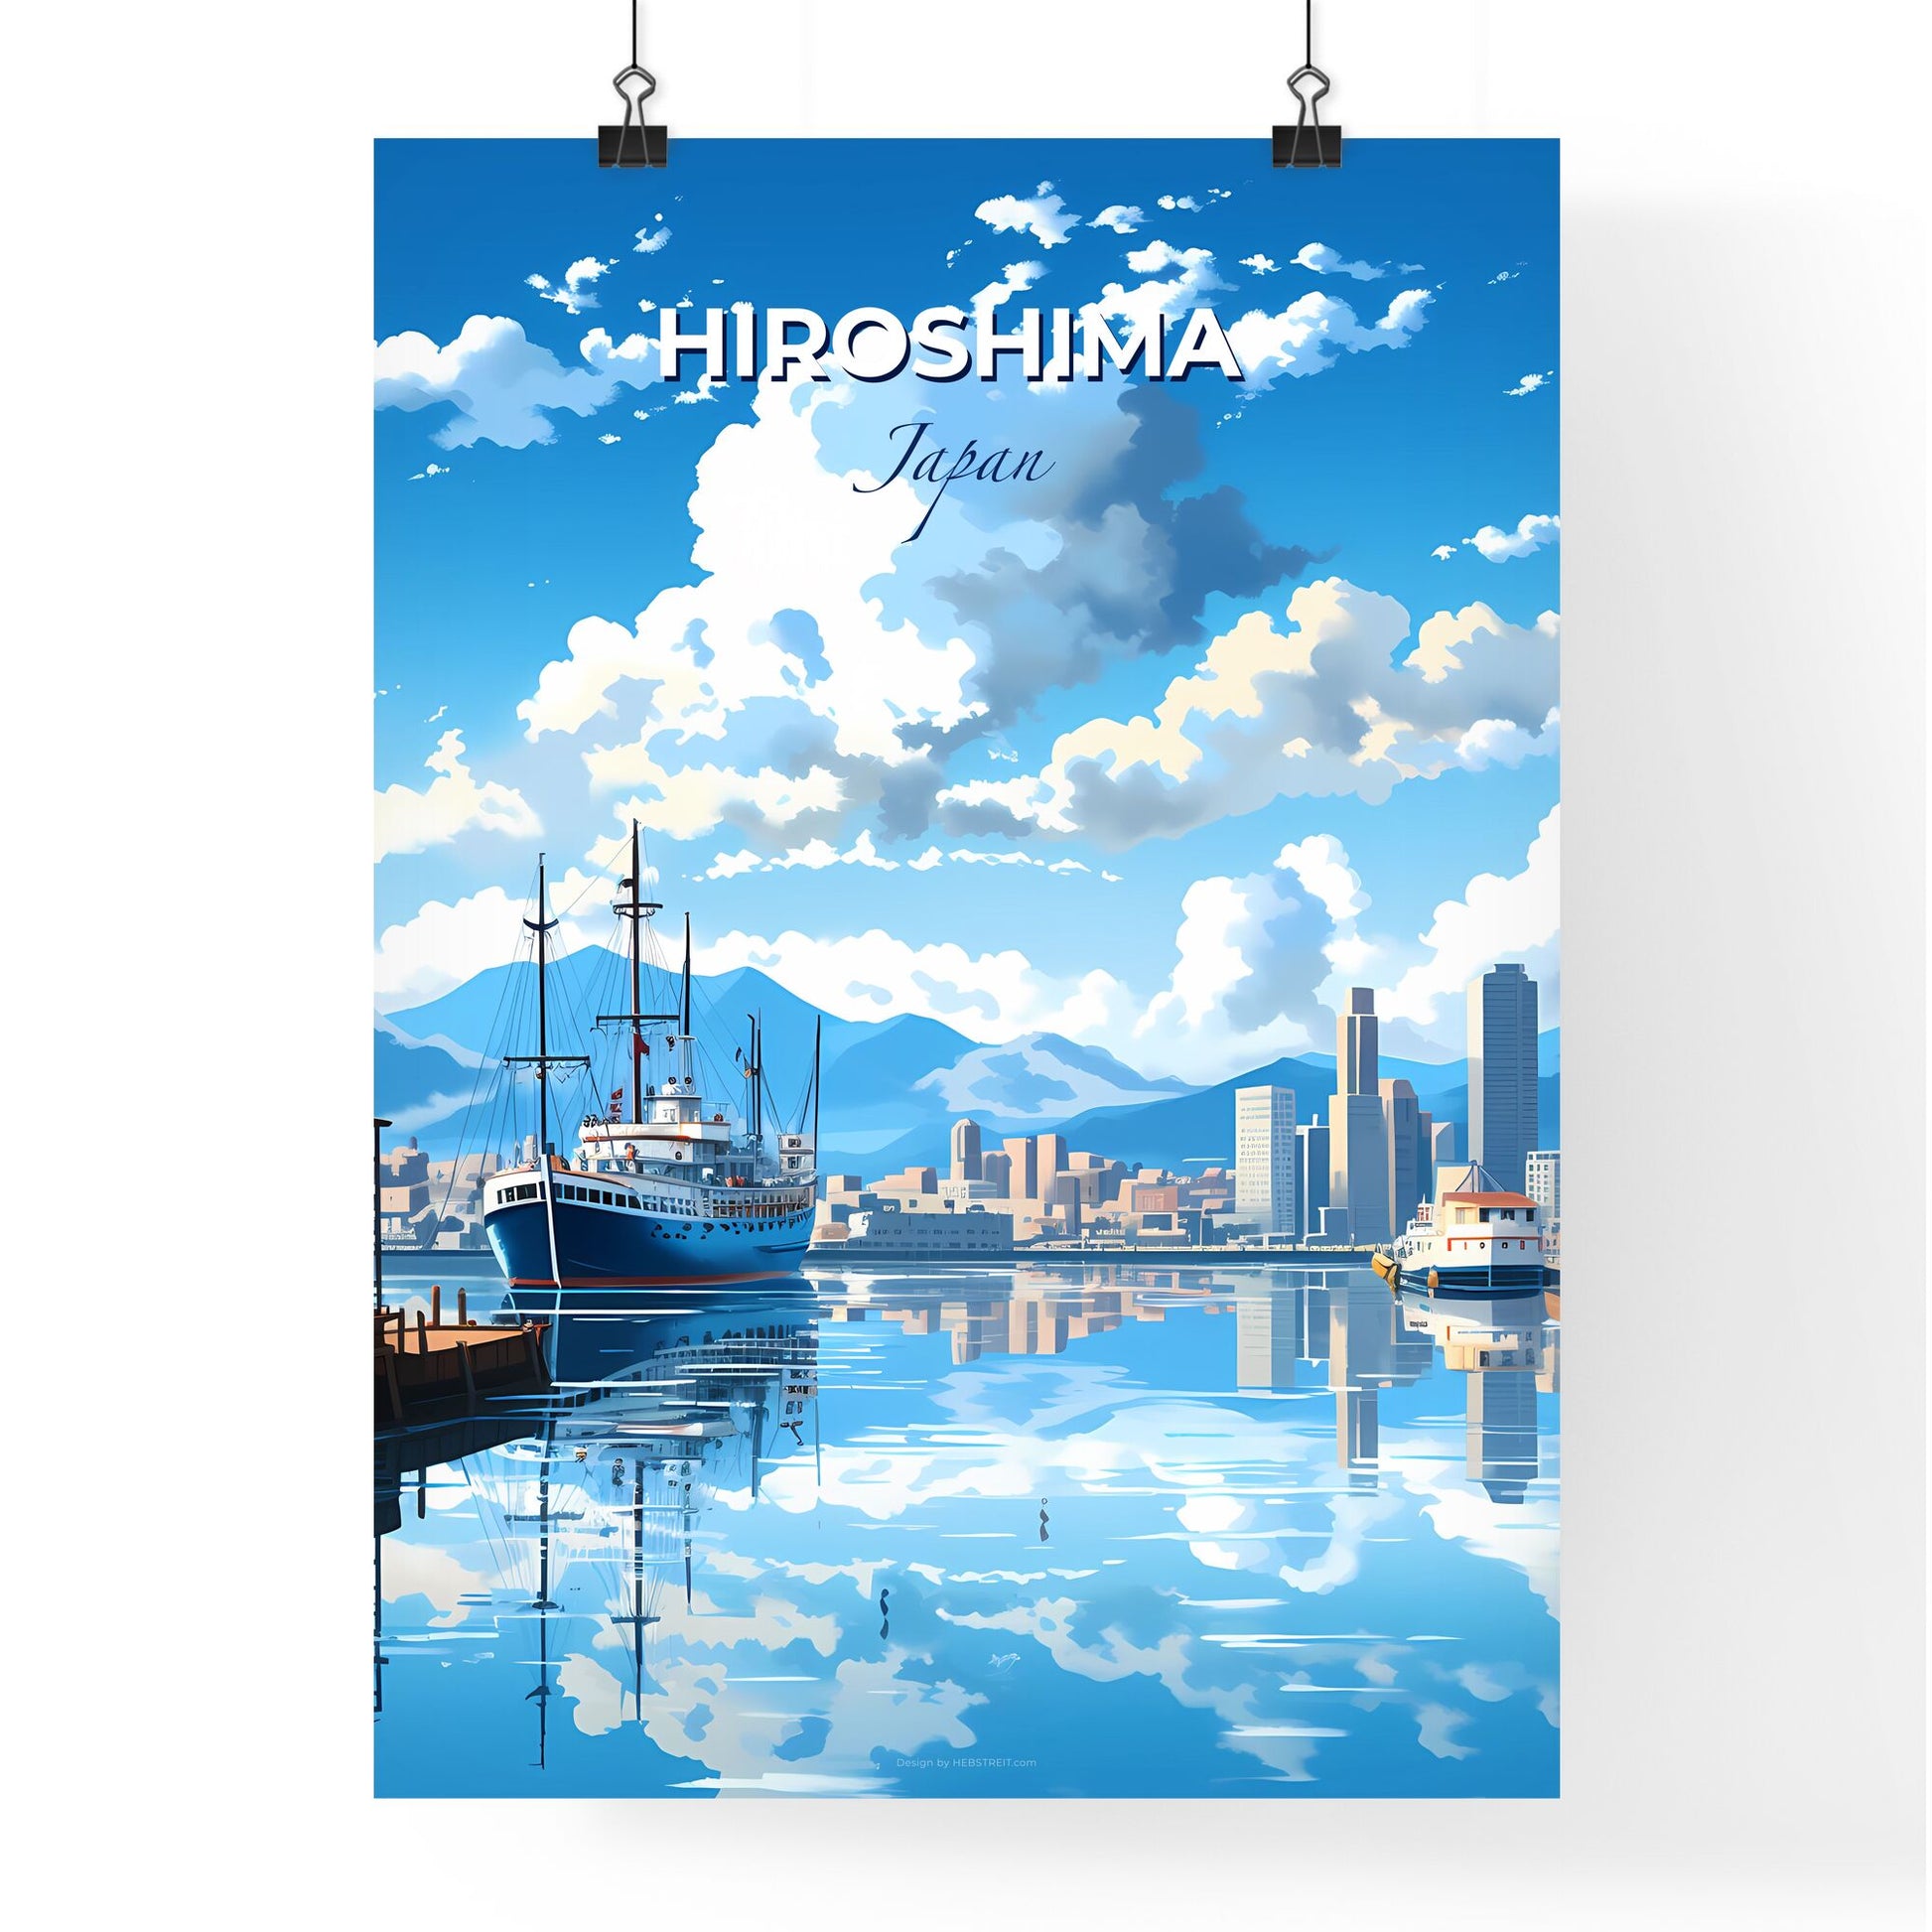 Hiroshima Japan Harbor Skyline - Vivid Artistic Painting of a Ship in a Tranquil Water Default Title